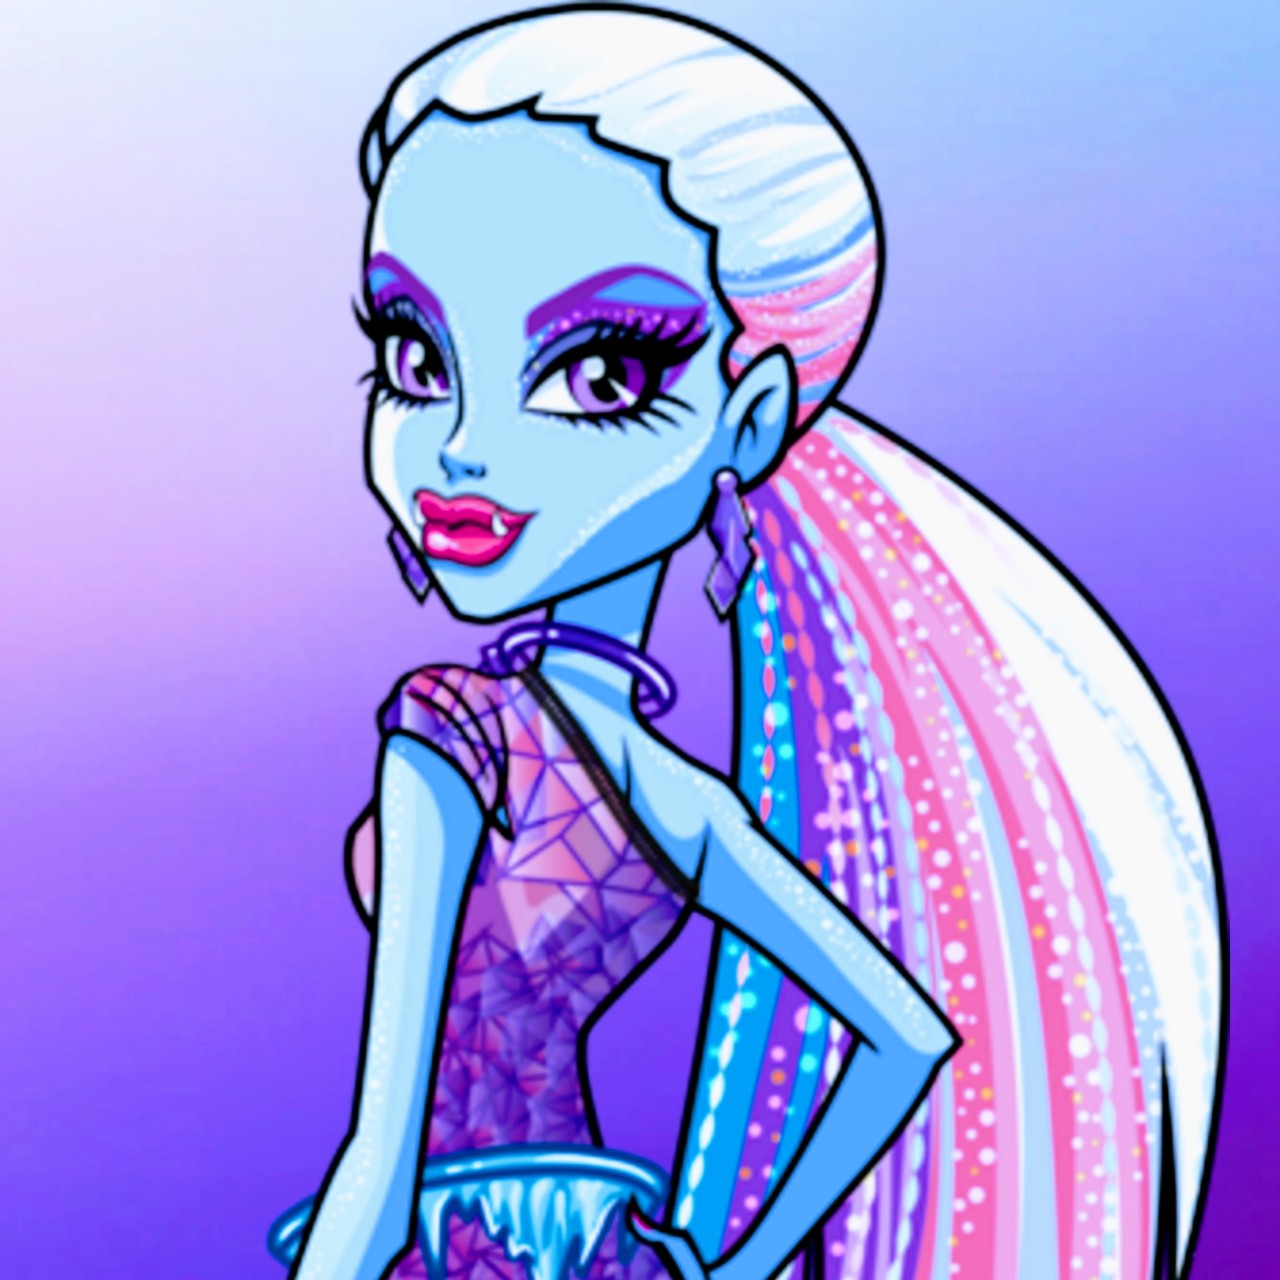 Monster High Icons (Close-up)Like and/or reblog if you save/use #monster high #scaris: city of frights #abbey bominable#ghoulia yelps#sparkly#glitter#close-up#icons#square icons #icons by me